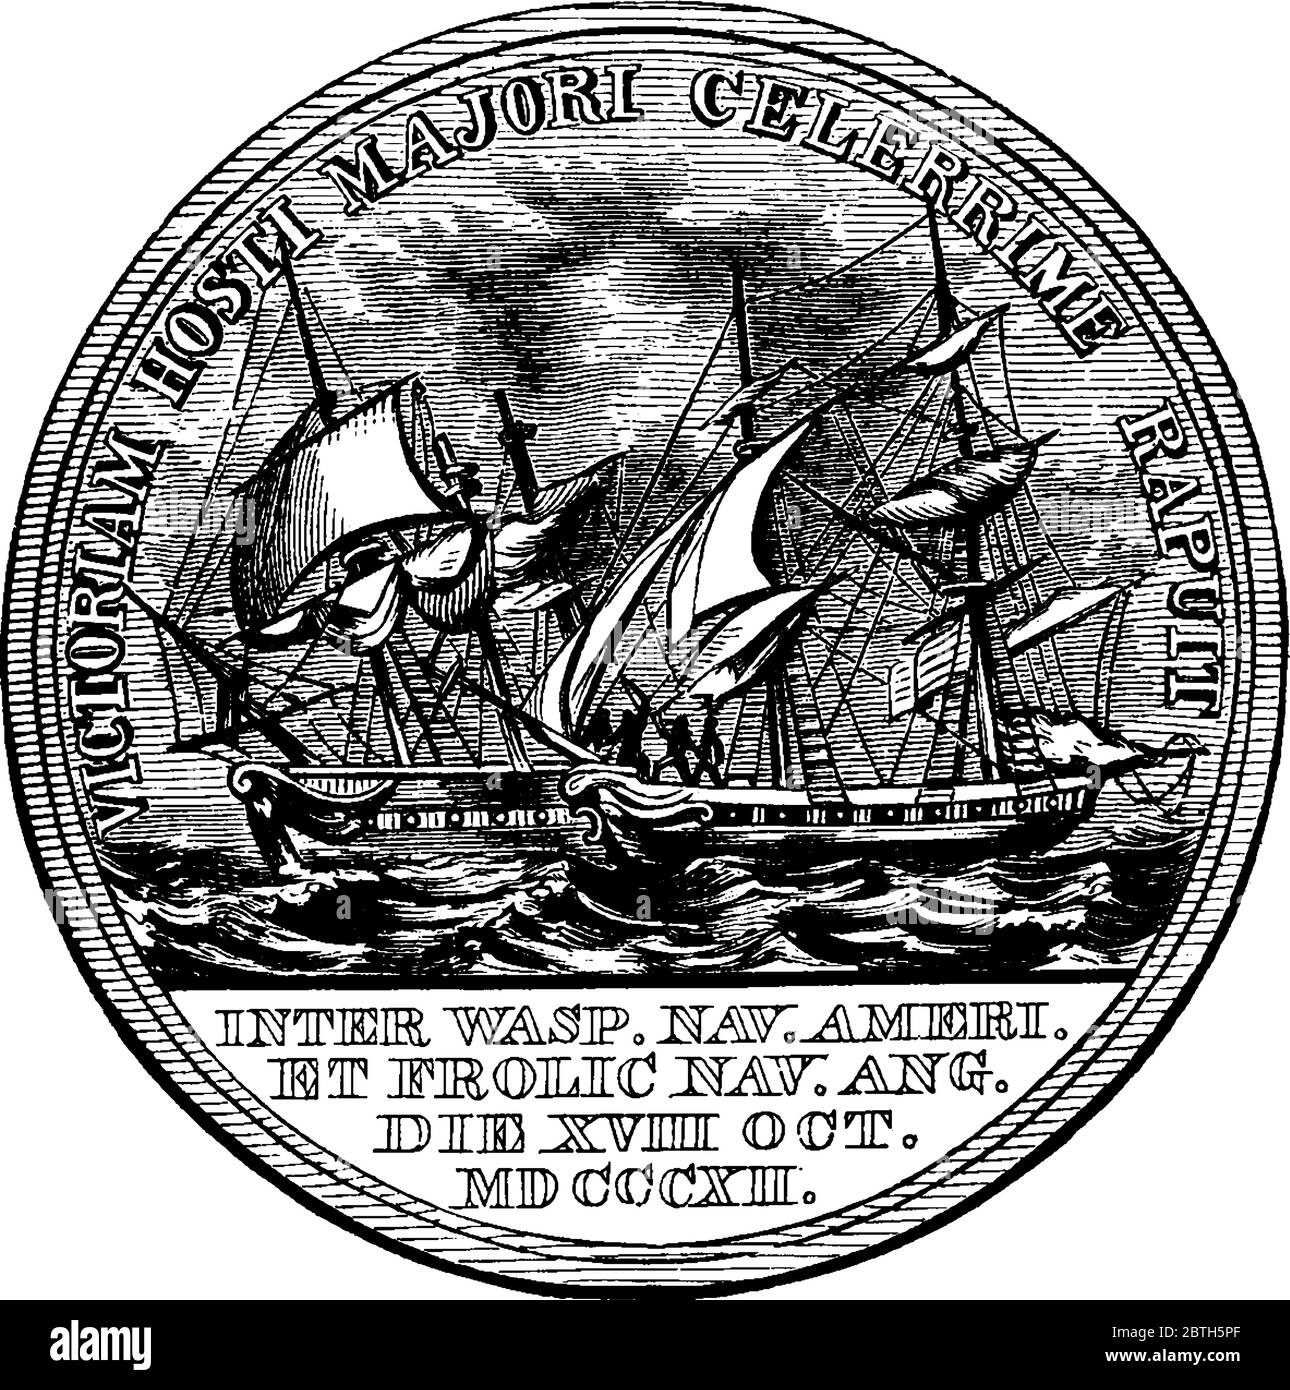 Gold medal engraved with writings and image of pirates and people, awarded to an officer, Commodore Jacob Jones, in the United States Navy, vintage li Stock Vector